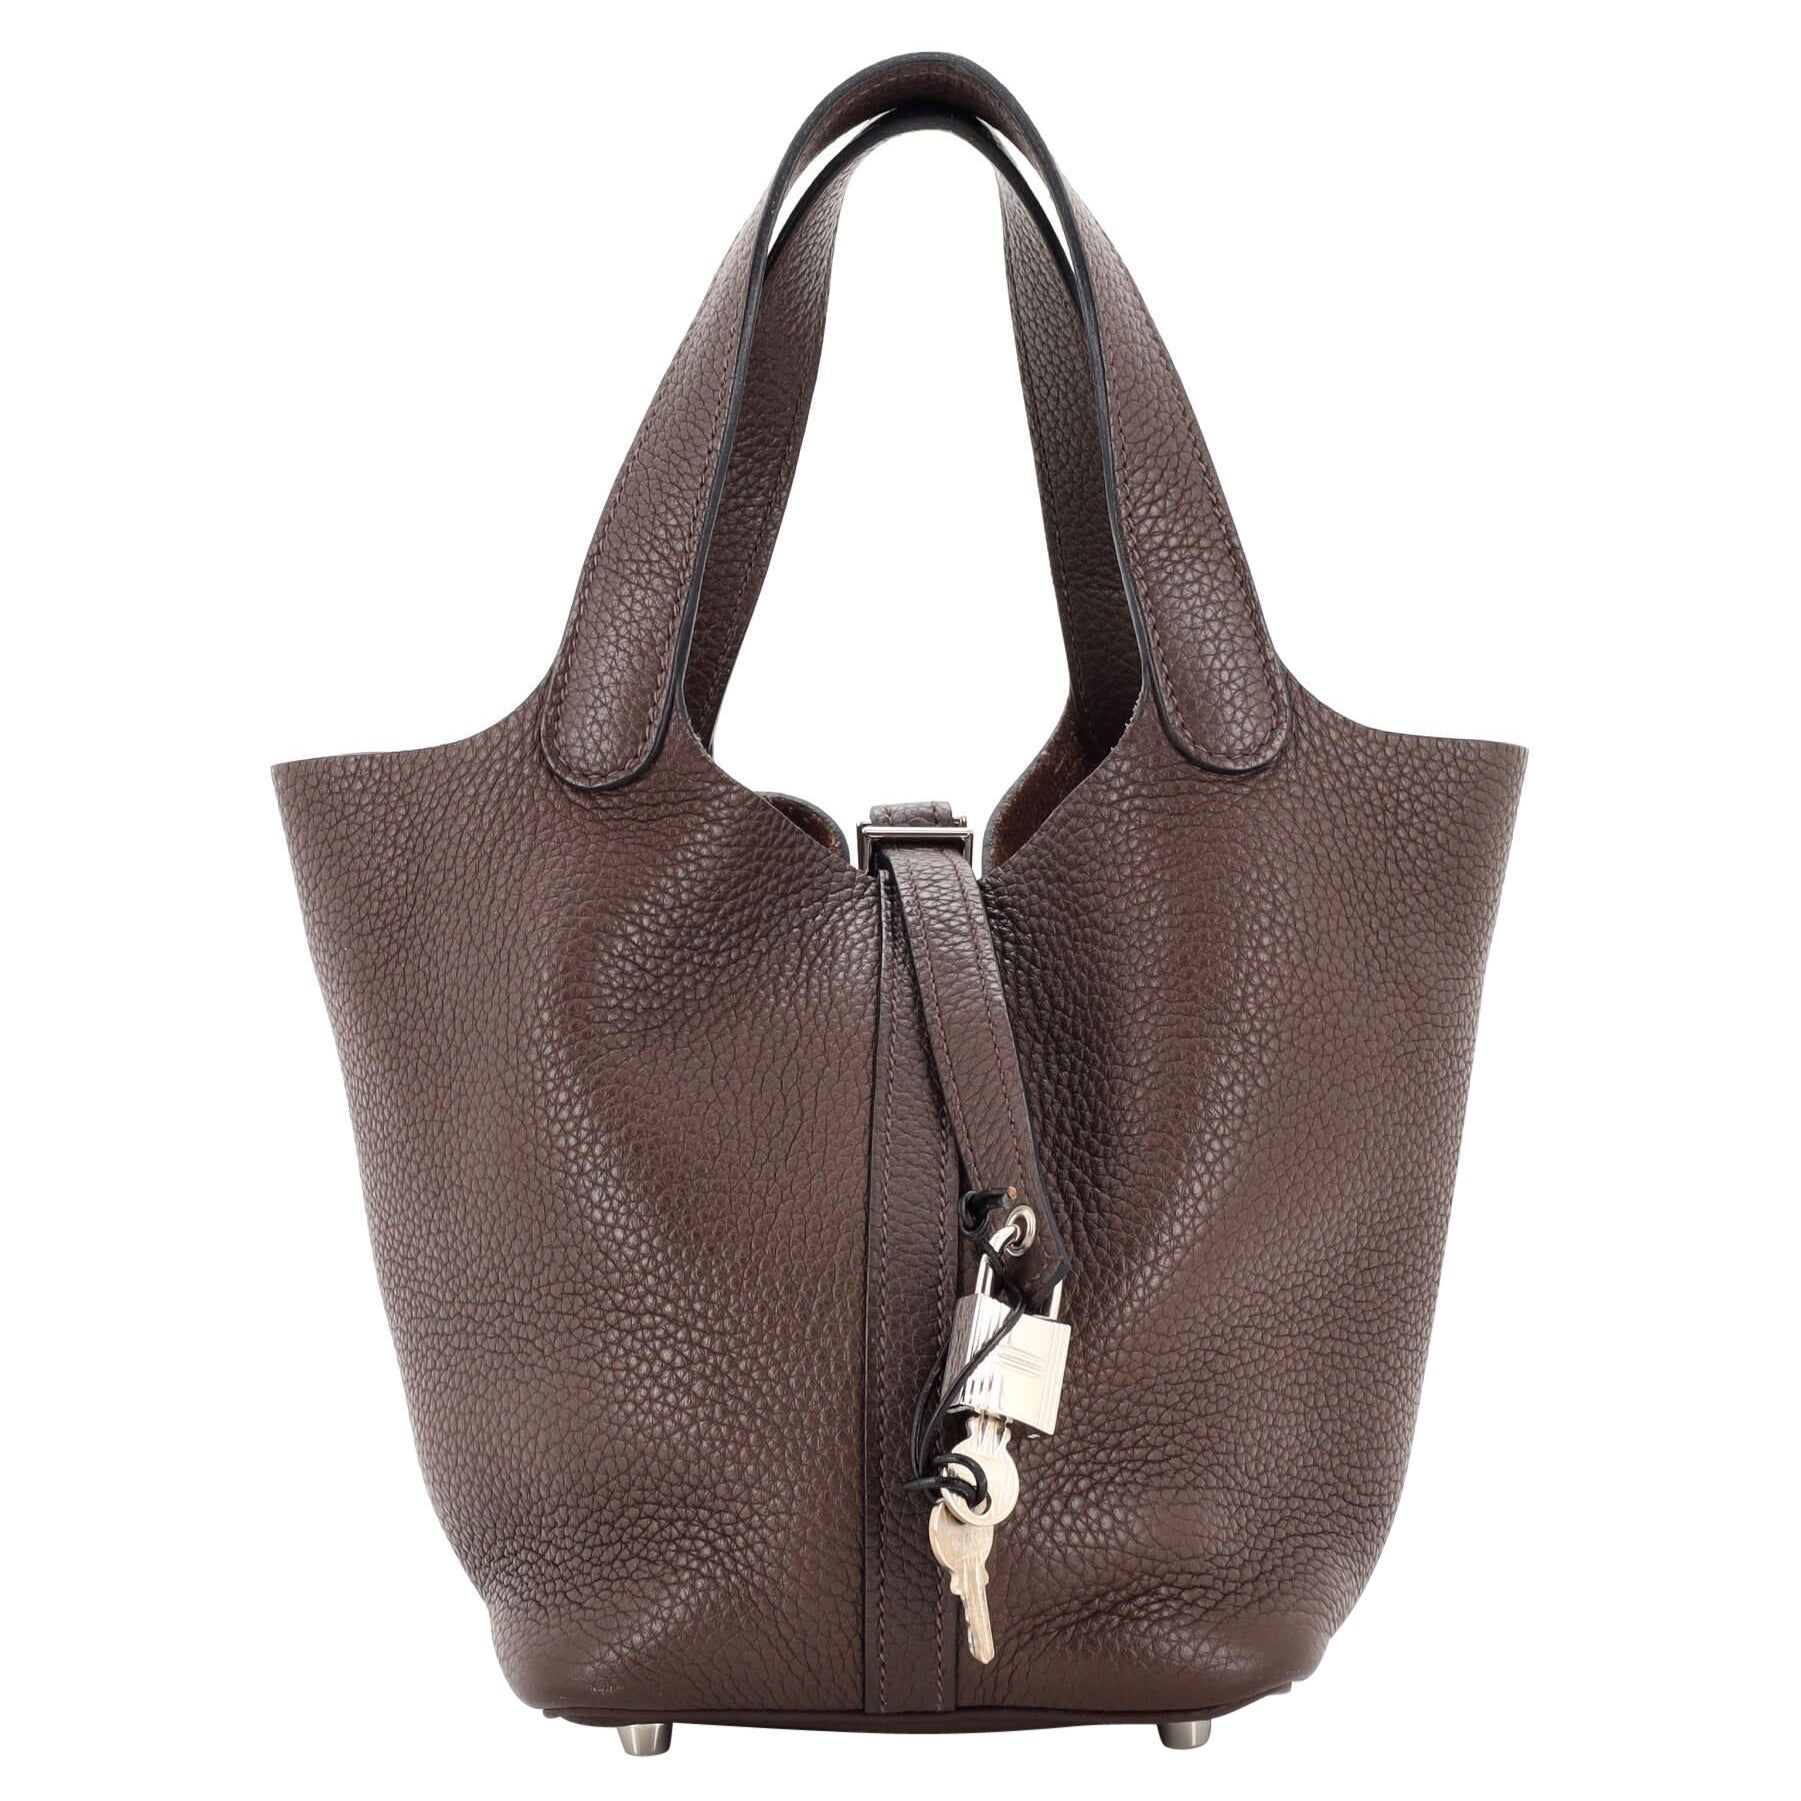 Hermes Picotin Lock bag PM Etoupe grey Clemence leather Gold